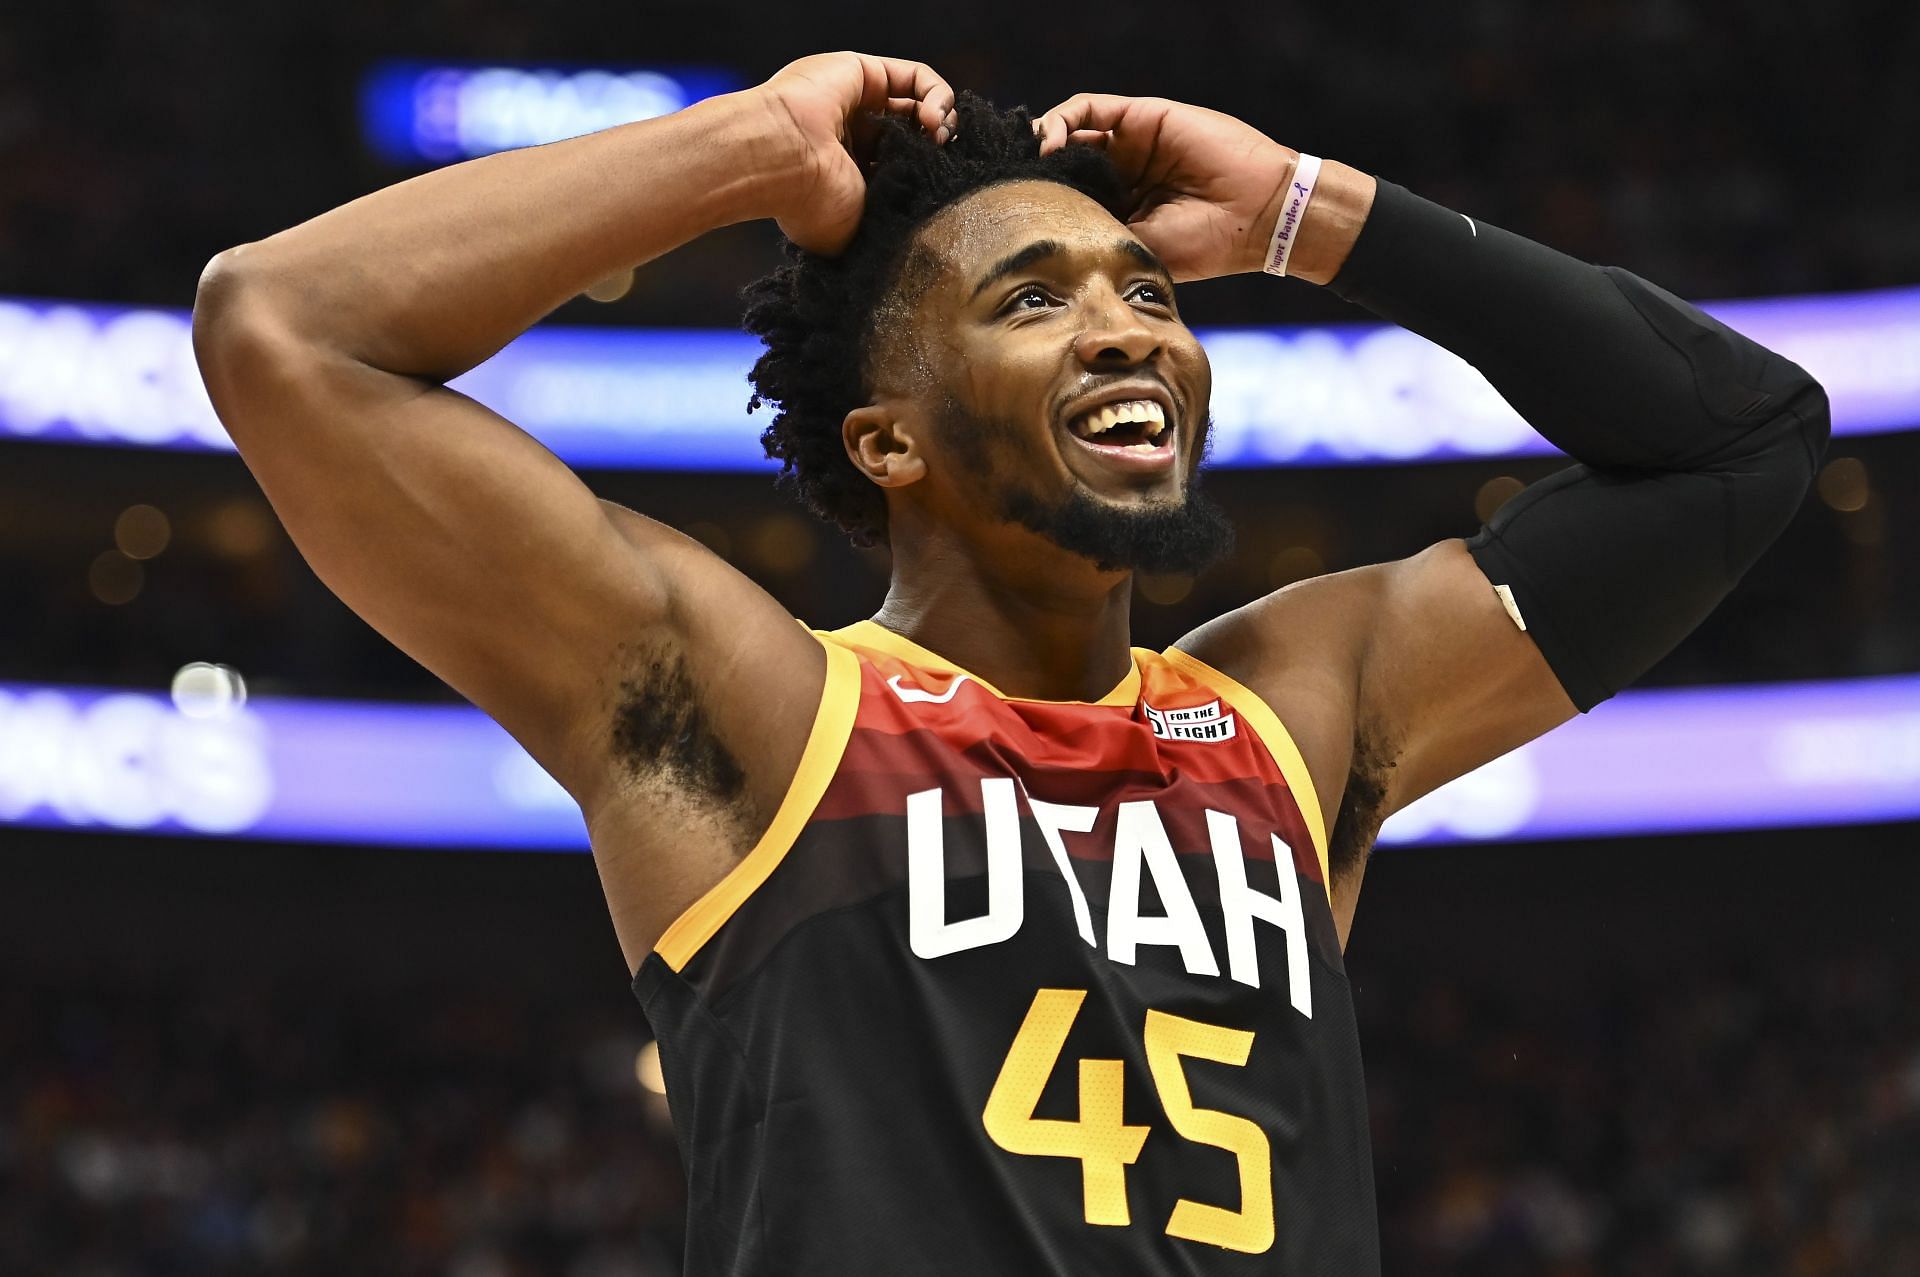 Donovan Mitchell #45 of the Utah Jazz reacts to a call during a game against the Oklahoma City Thunder at Vivint Smart Home Arena on October 20, 2021 in Salt Lake City, Utah.